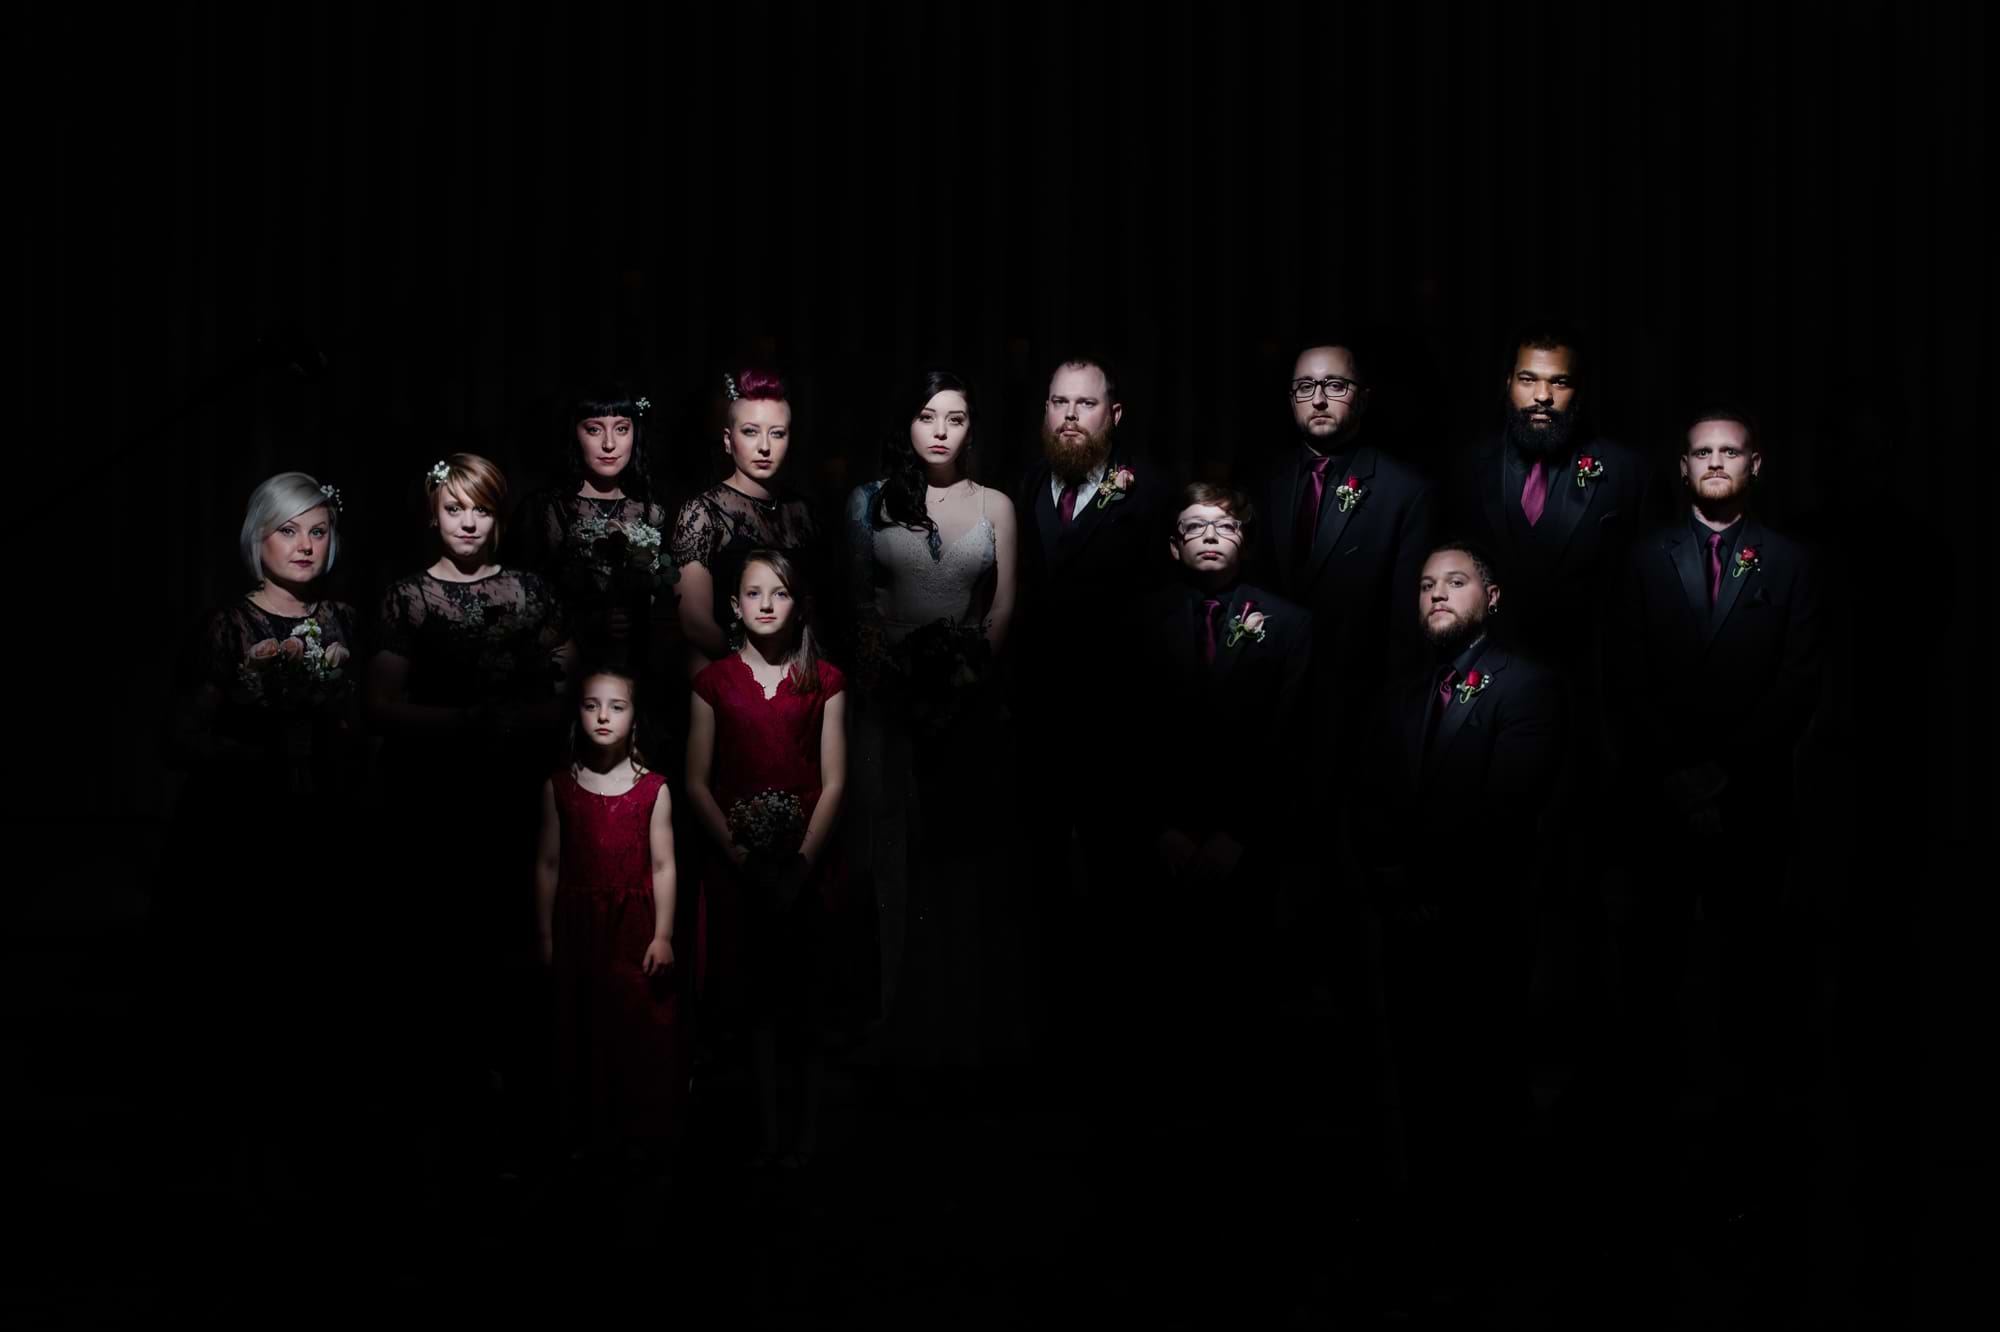 Gothic Themed Family Portrait - Black Forest by Wedgewood Weddings